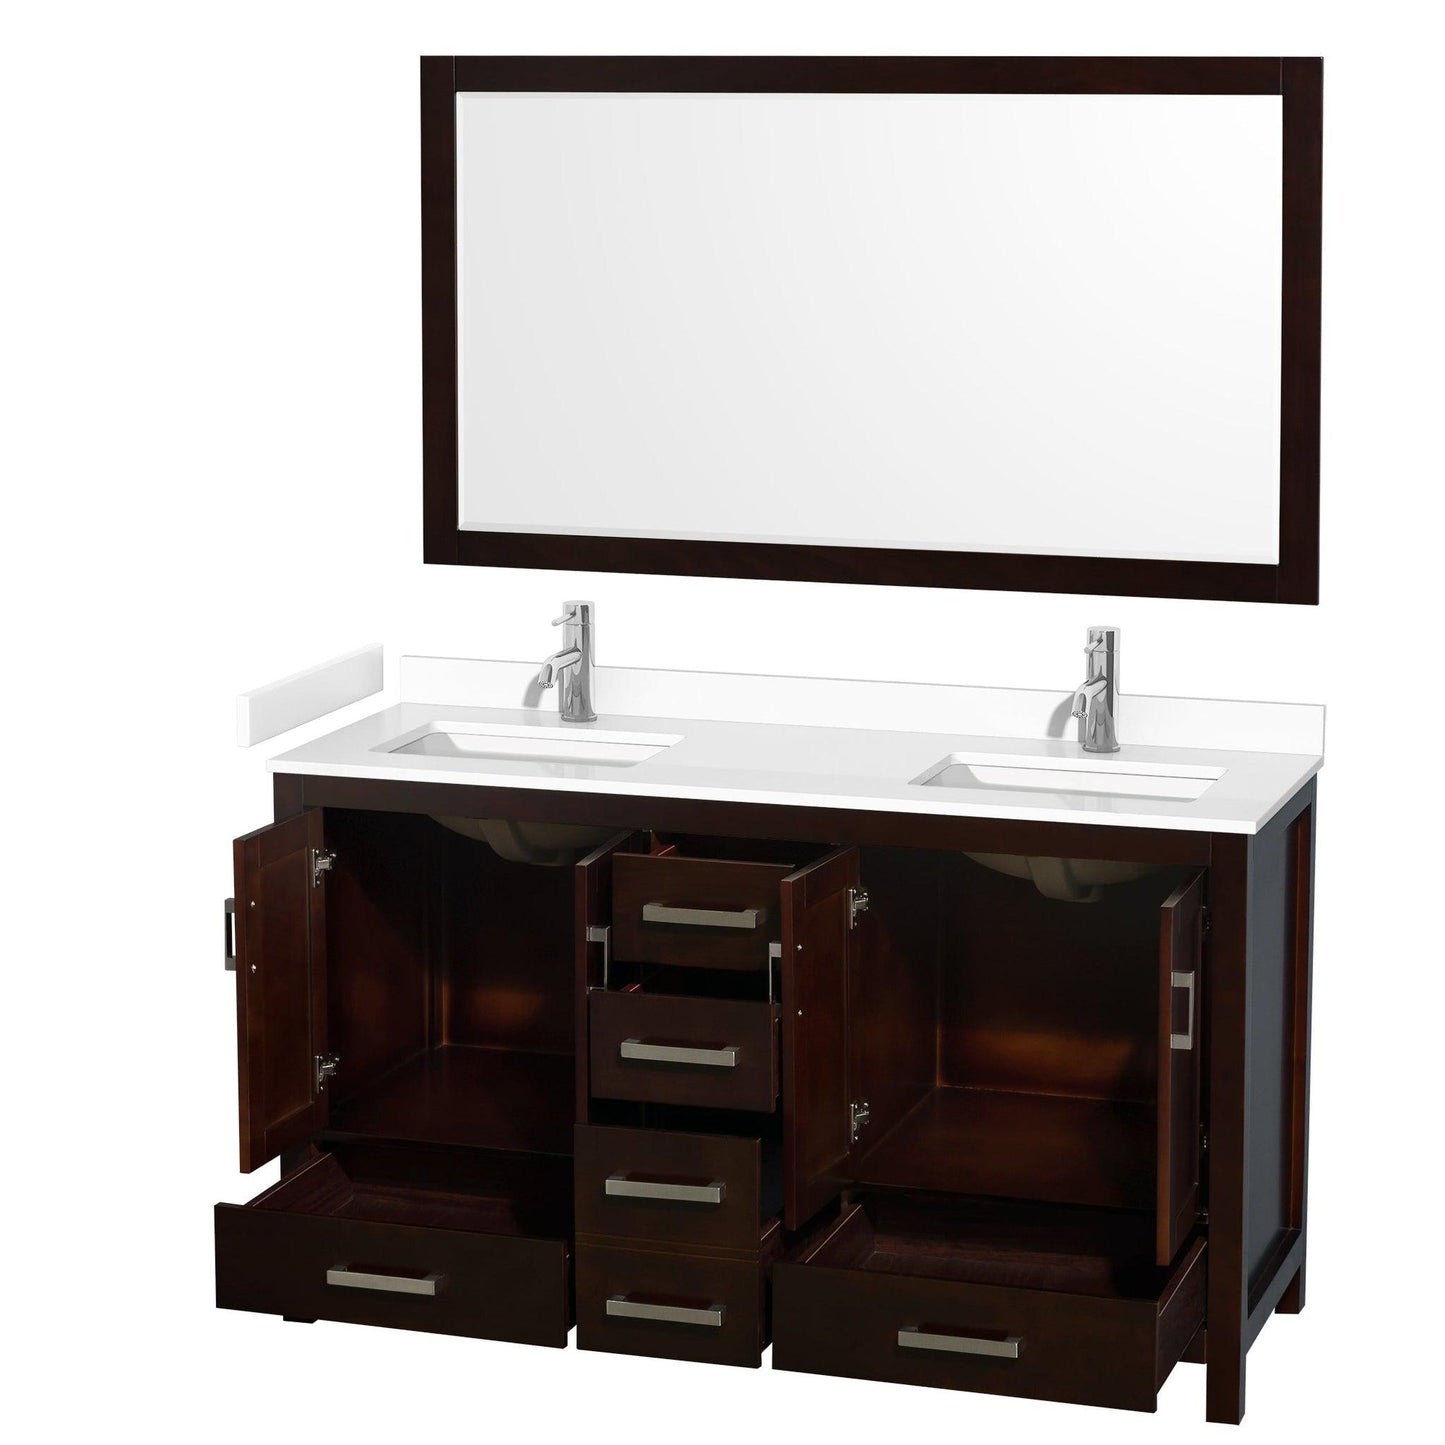 Wyndham Collection Sheffield 60" Double Bathroom Vanity in Espresso, White Cultured Marble Countertop, Undermount Square Sinks, 58" Mirror